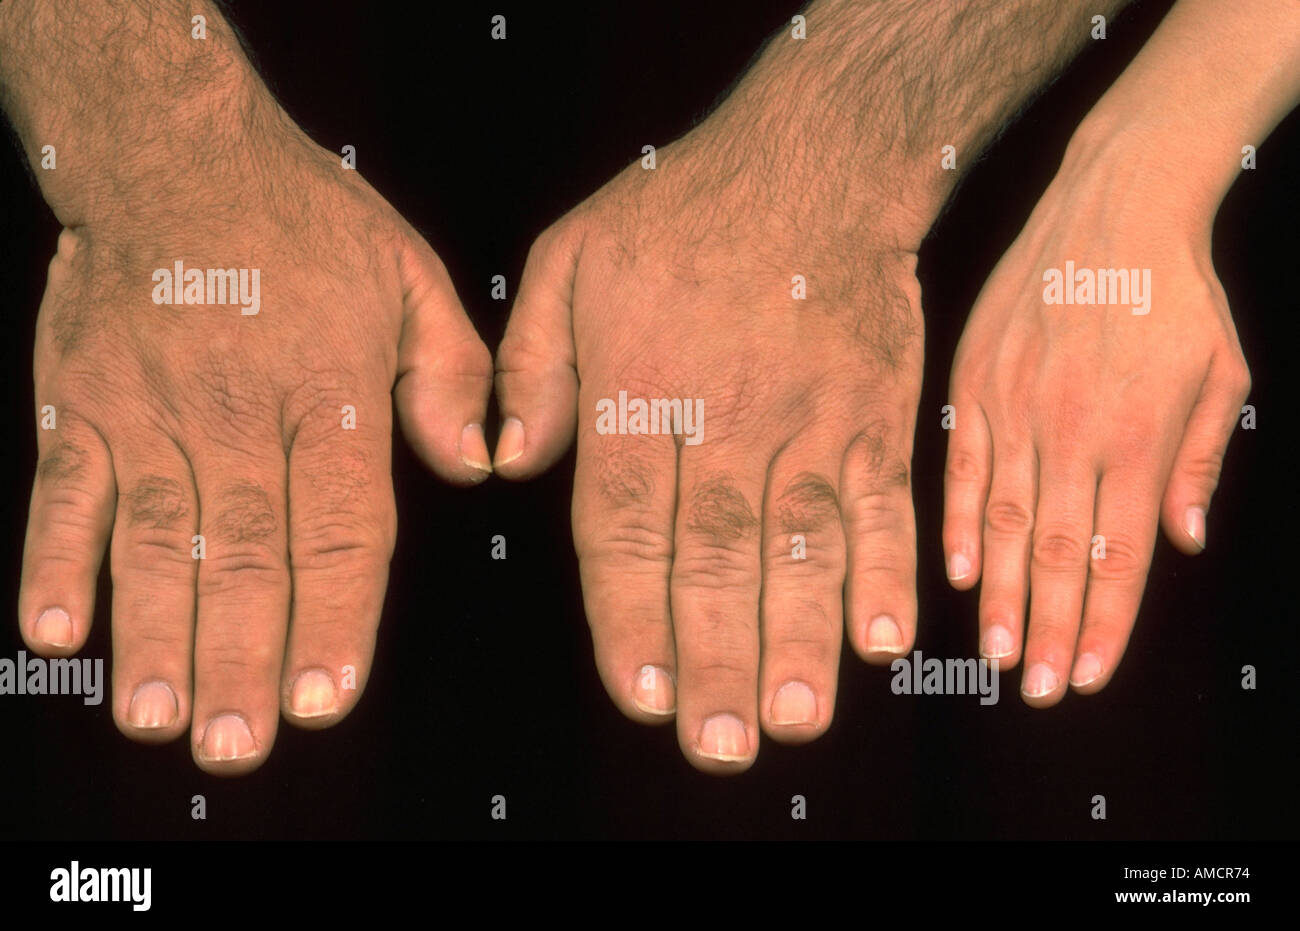 Acromegaly Stock Photo